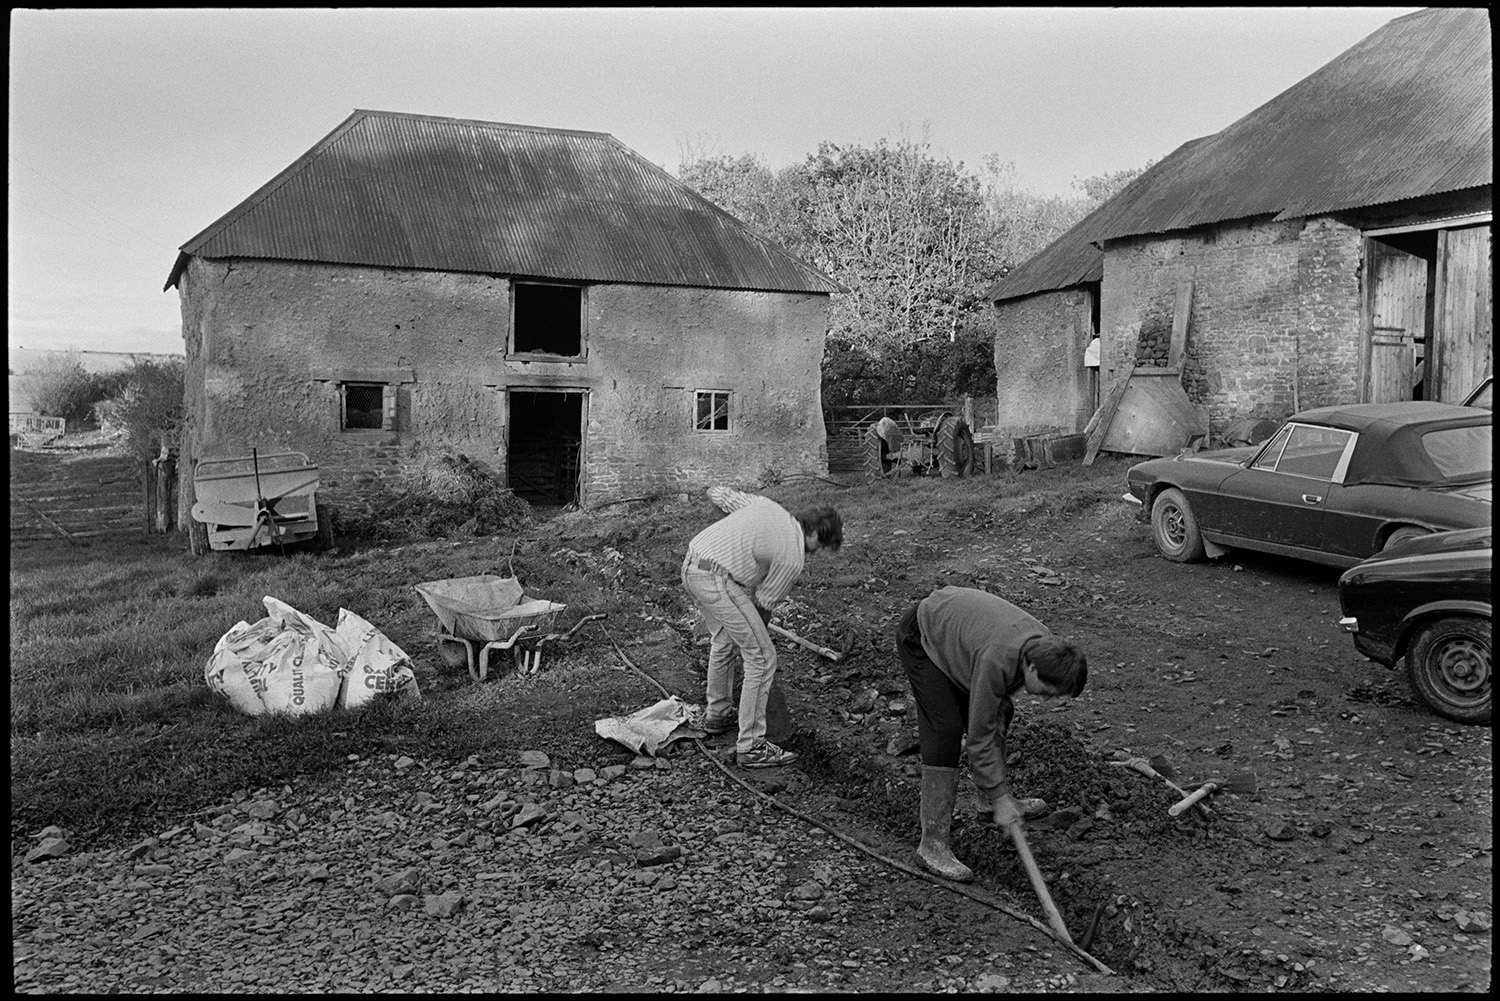 Remains of orchard in front of cob and thatch farmhouse mucking out, manure heap. 
[Two men digging a ditch in a farmyard at South Ash, Kings Nympton. Parked cars, barns with corrugated iron roofs, a tractor, dung heap and wheelbarrow are all visible in the farmyard.]